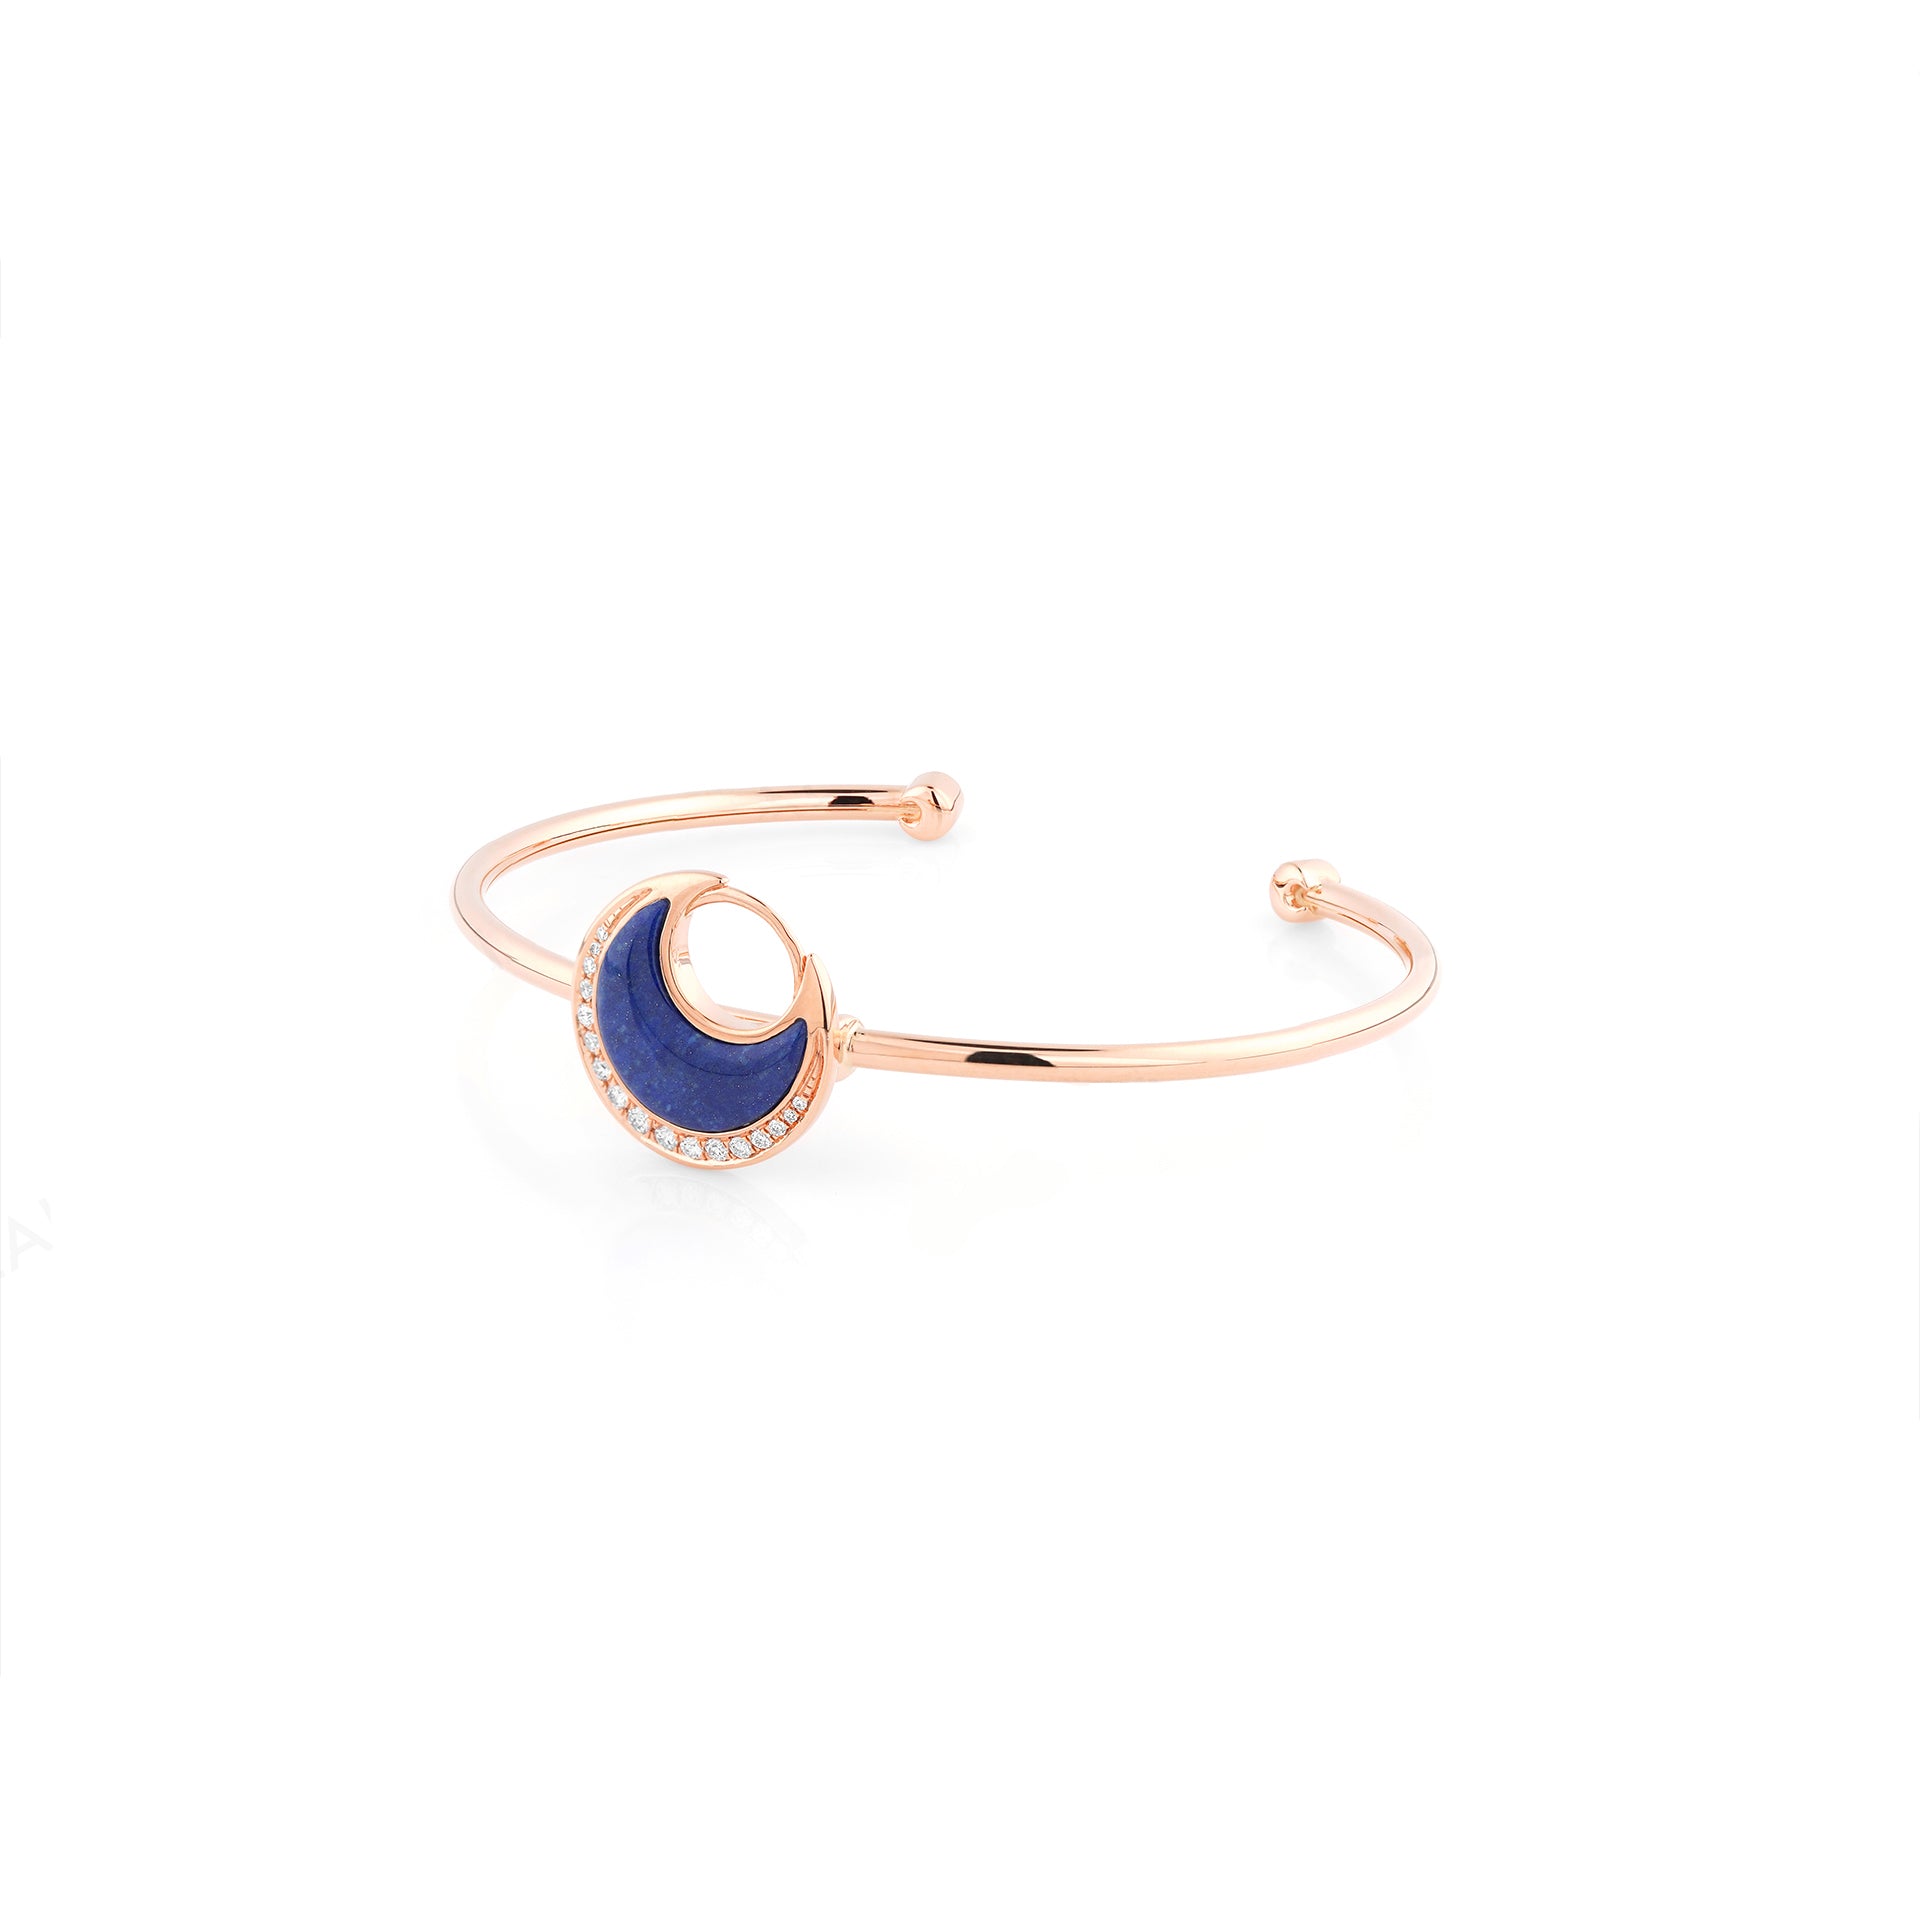 Al Hilal bangle in rose gold with lapis stone and diamonds